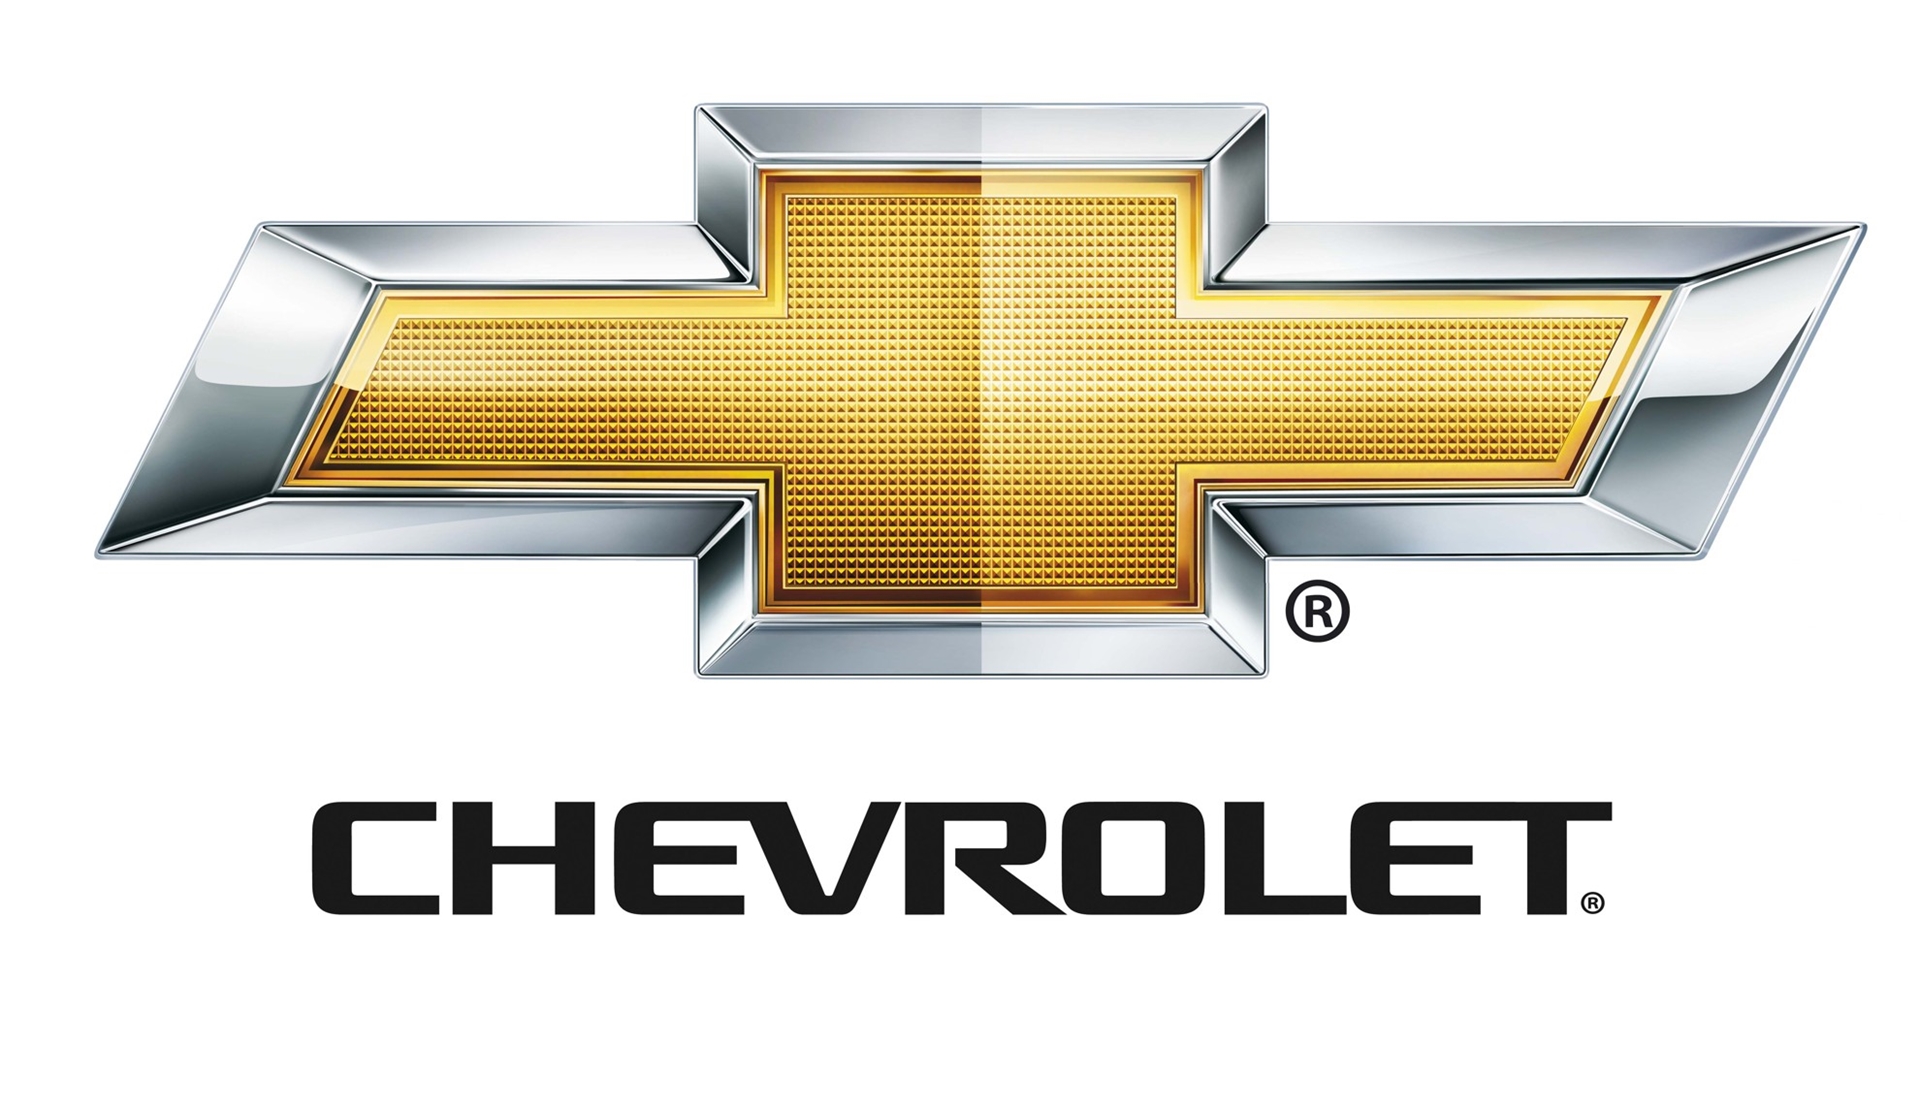 CHEVROLET TO JOIN THE STARS FOR RONAN KEATING’S EMERALDS & IVY CHARITY BALL